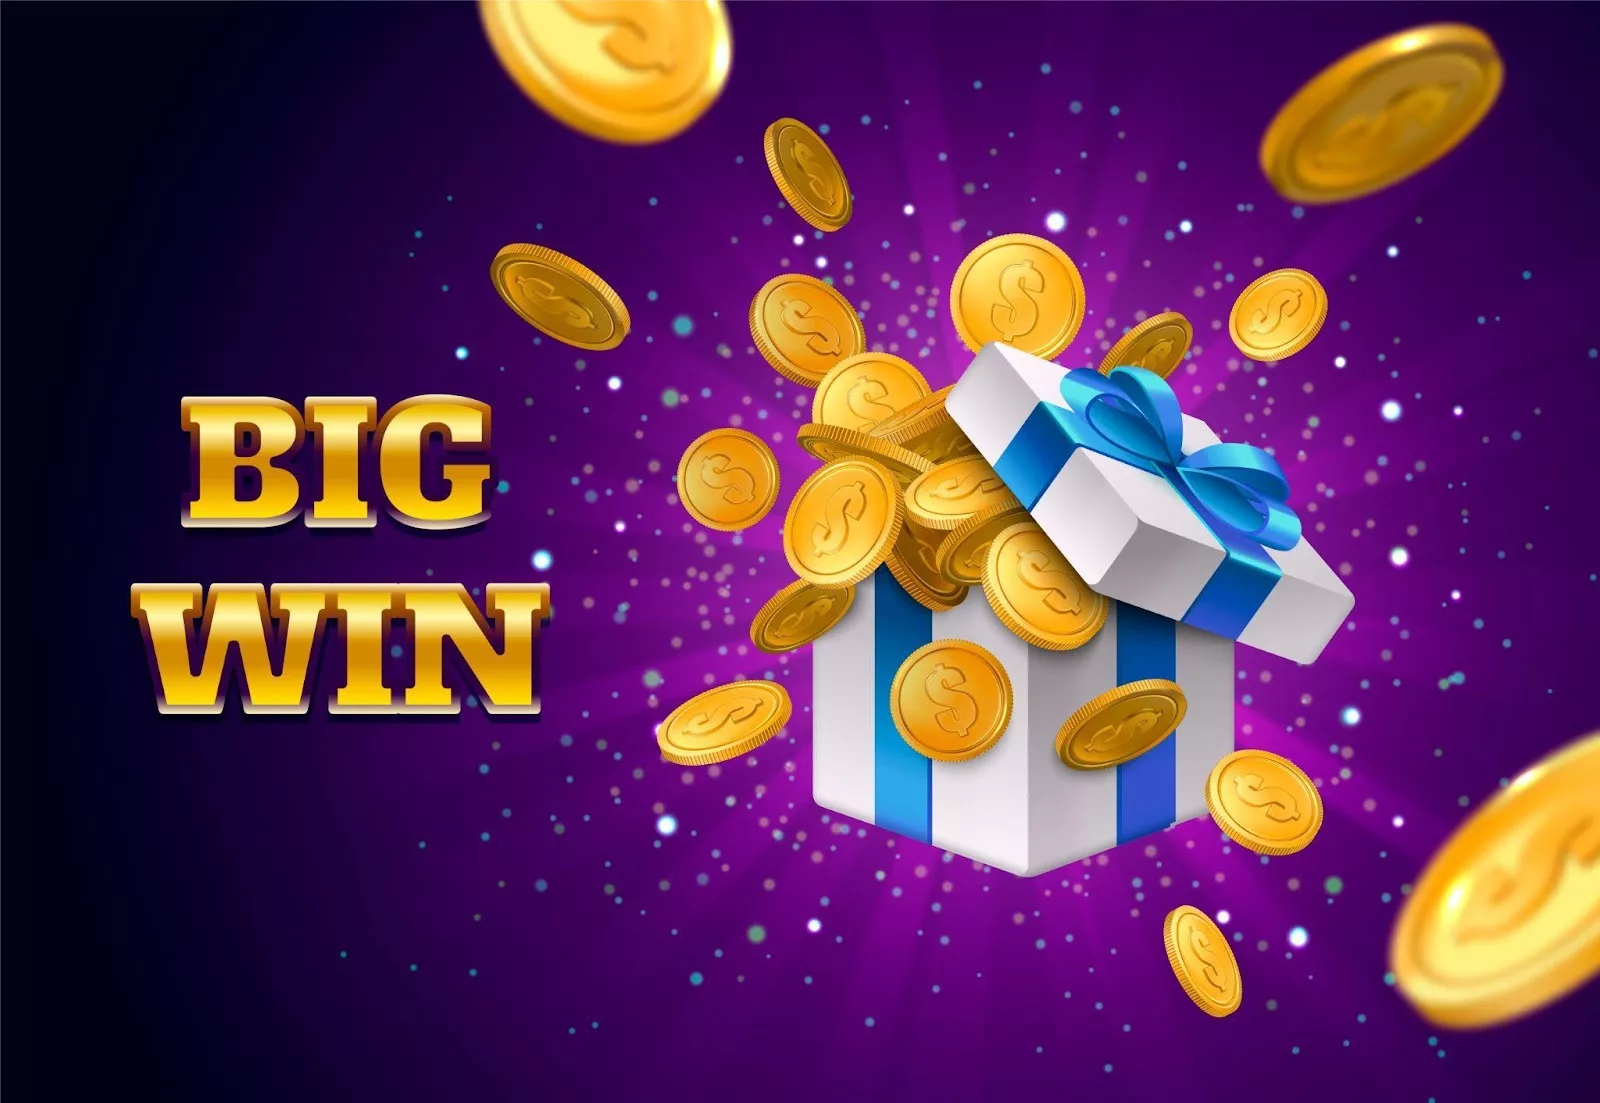 Online Casino Welcome Bonuses Guide for New Players